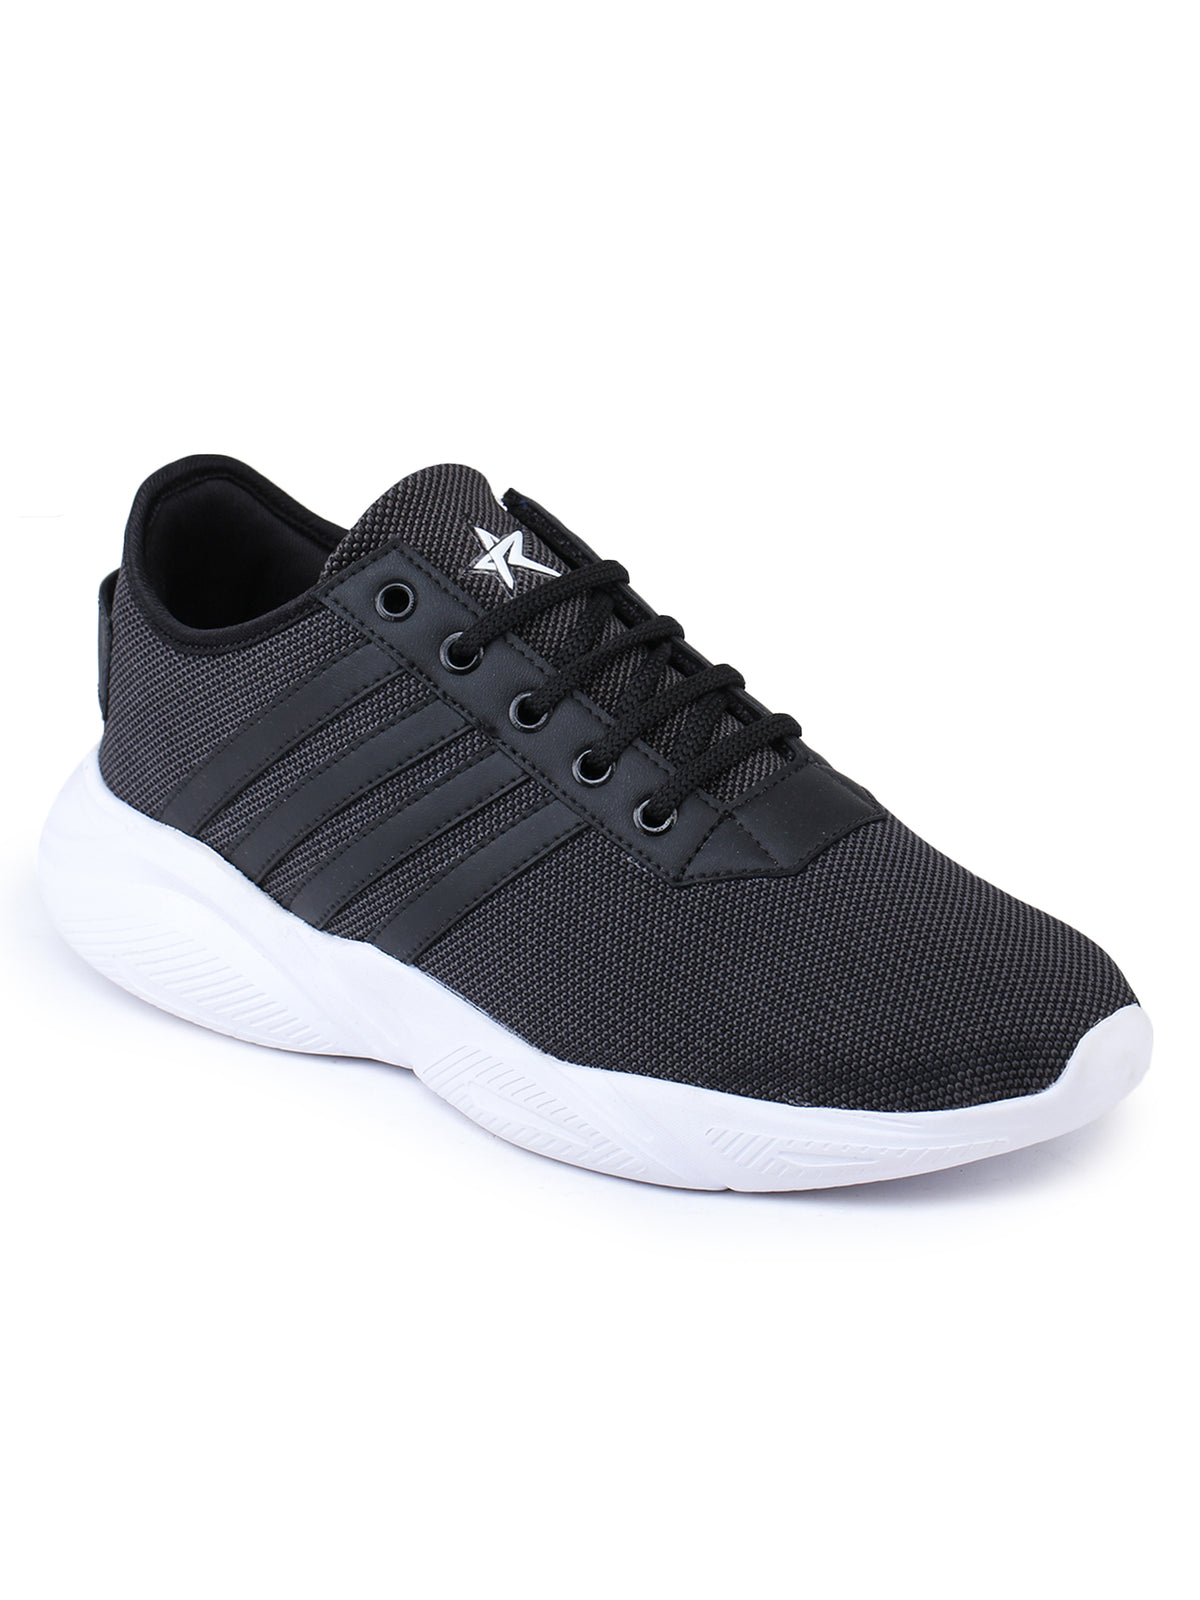 Black Solid Mesh Lace Up Lifestyle Casual Shoes For Men